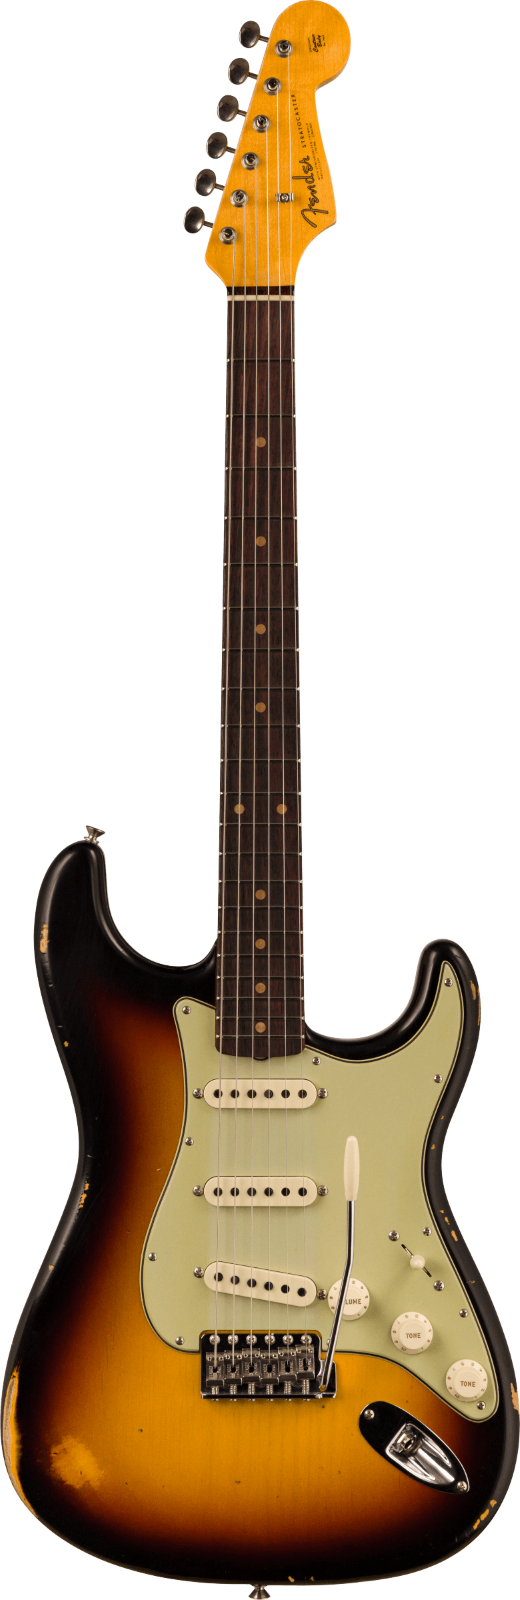 Fender Custom Shop Late 1962 Stratocaster Relic with Closet Classic Hardware, Rosewood Fingerboard, 3-Color Sunburst : photo 1